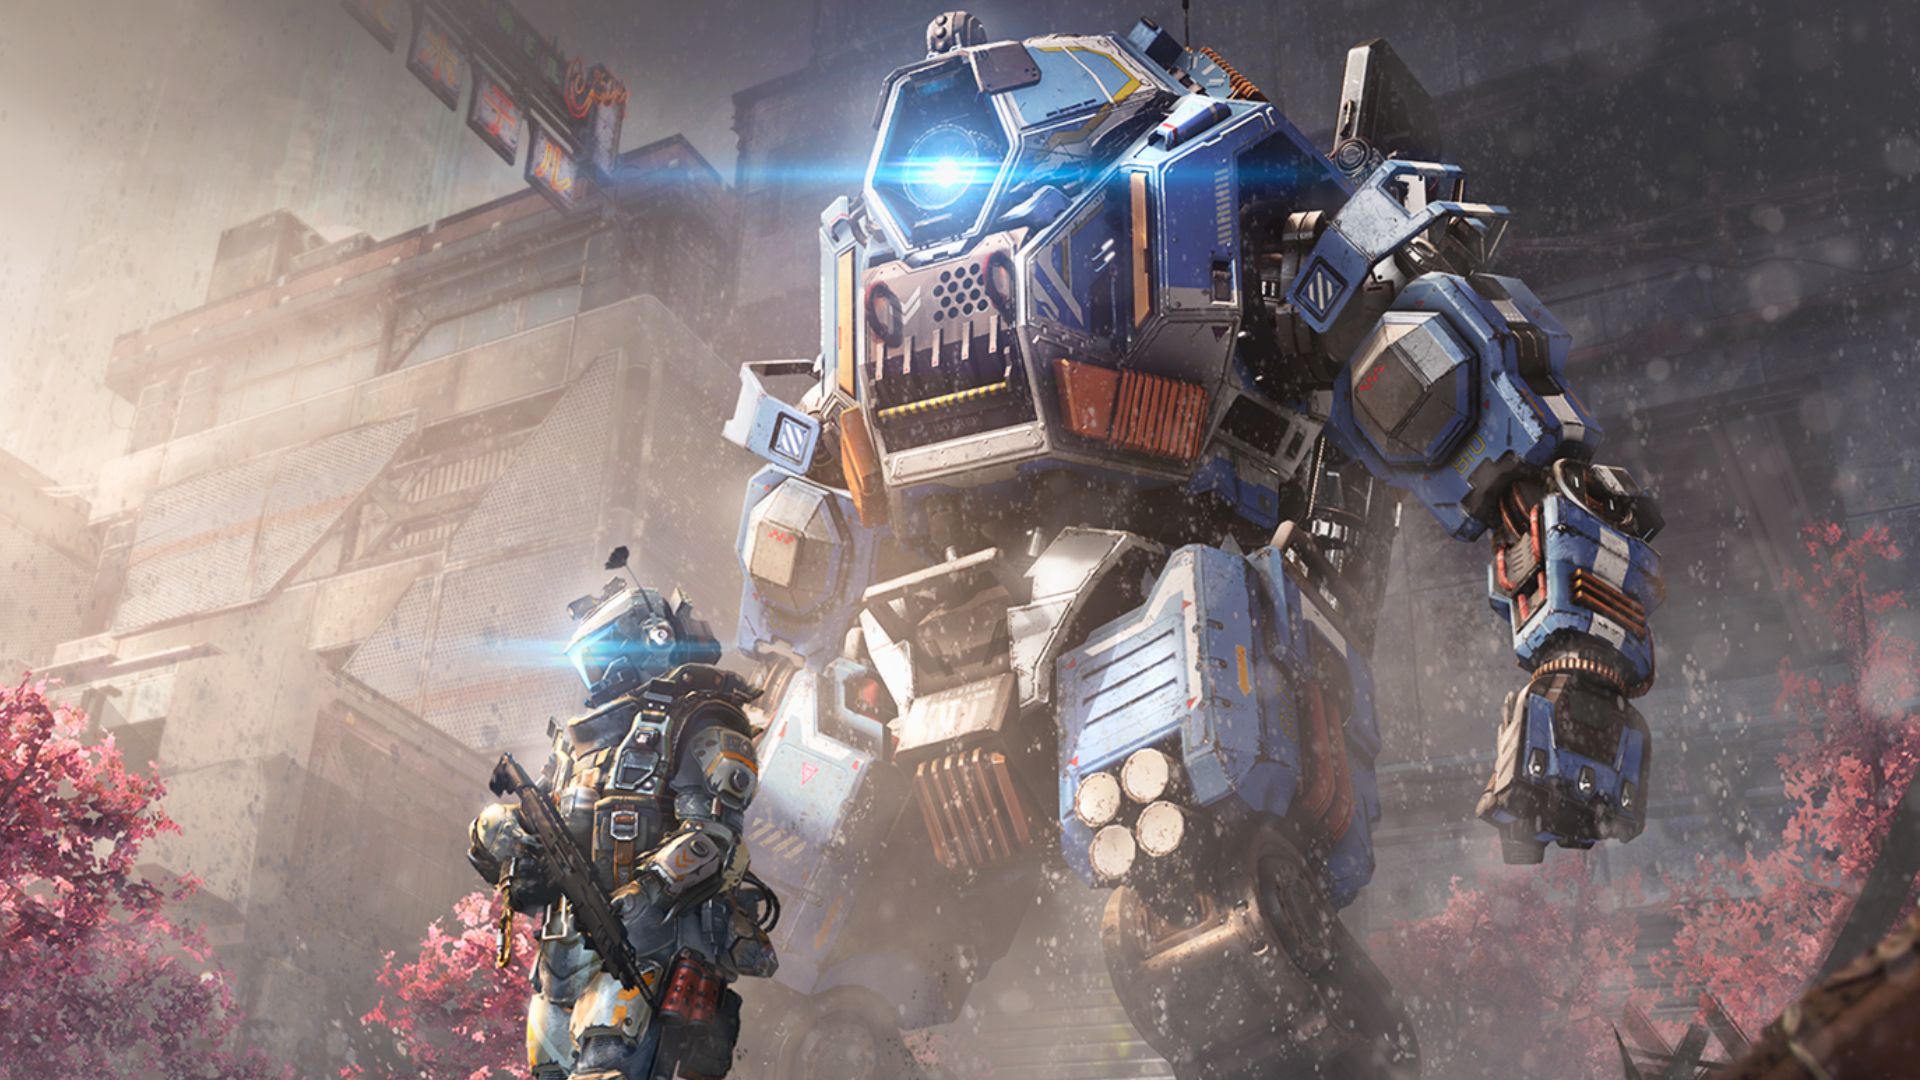 Respawn rumored to be making a new Titanfall game, but not Titanfall 3